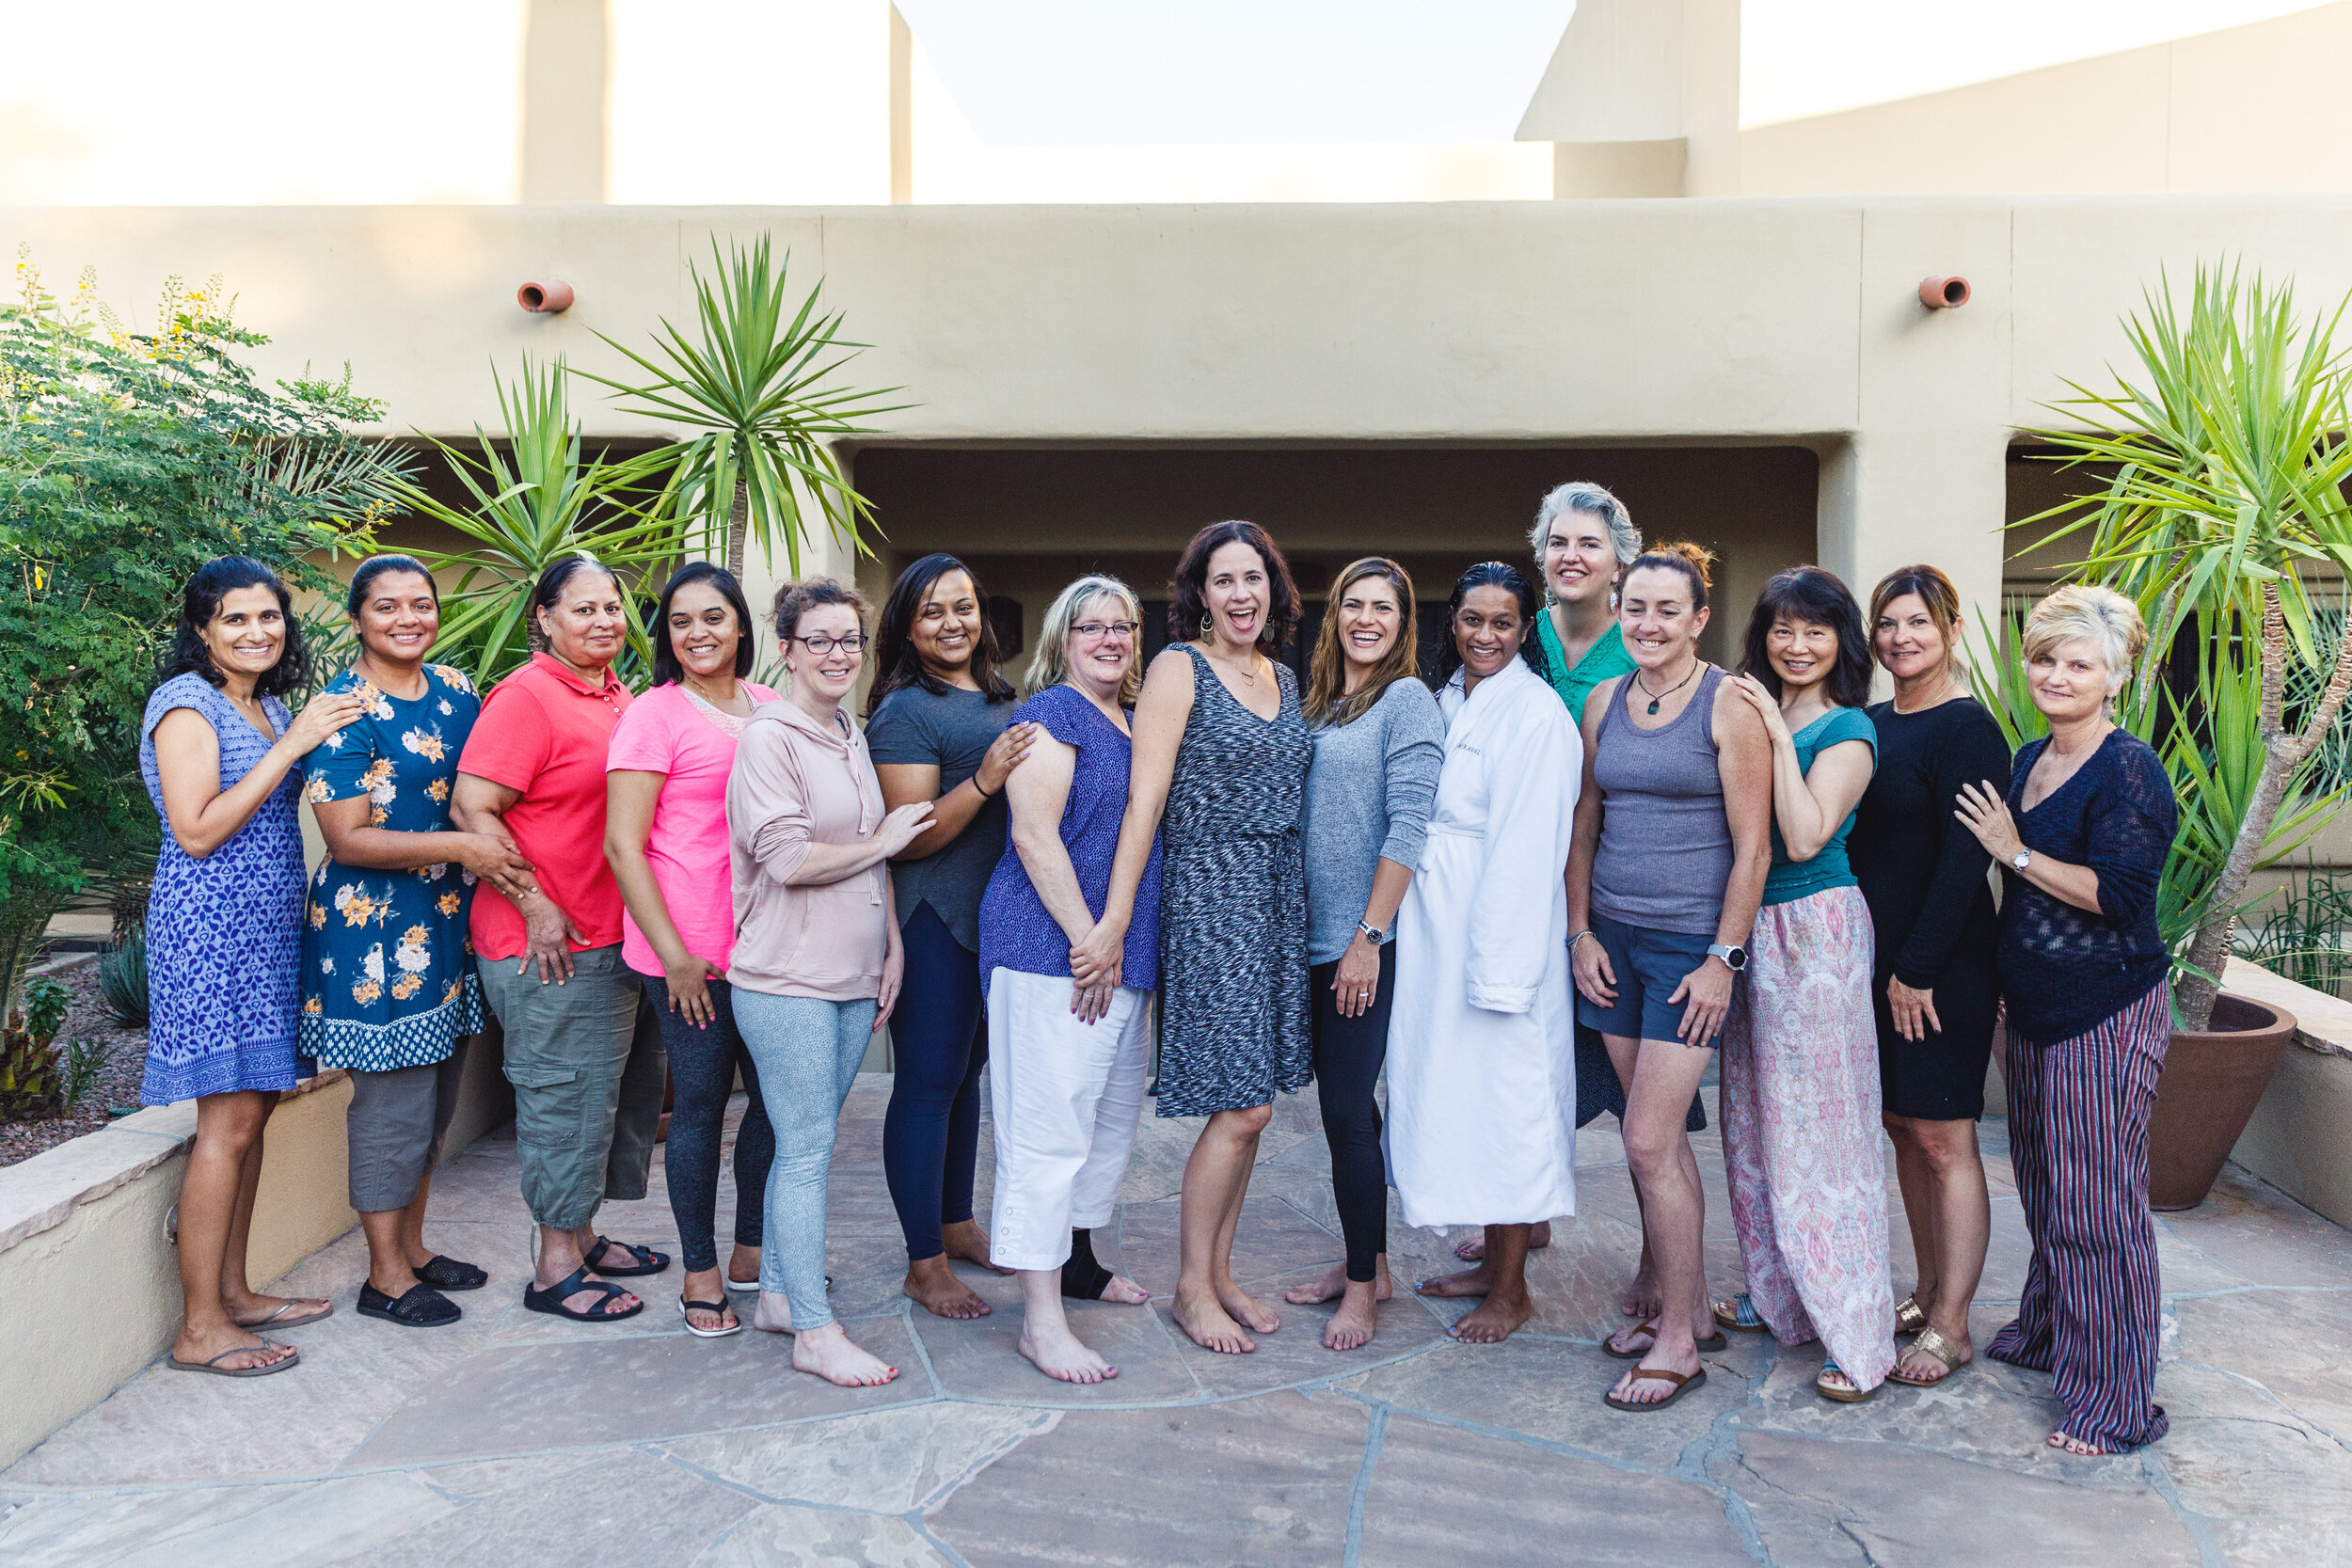 Dr. Jill Wener poses for a group photo with meditation retreat attendees.